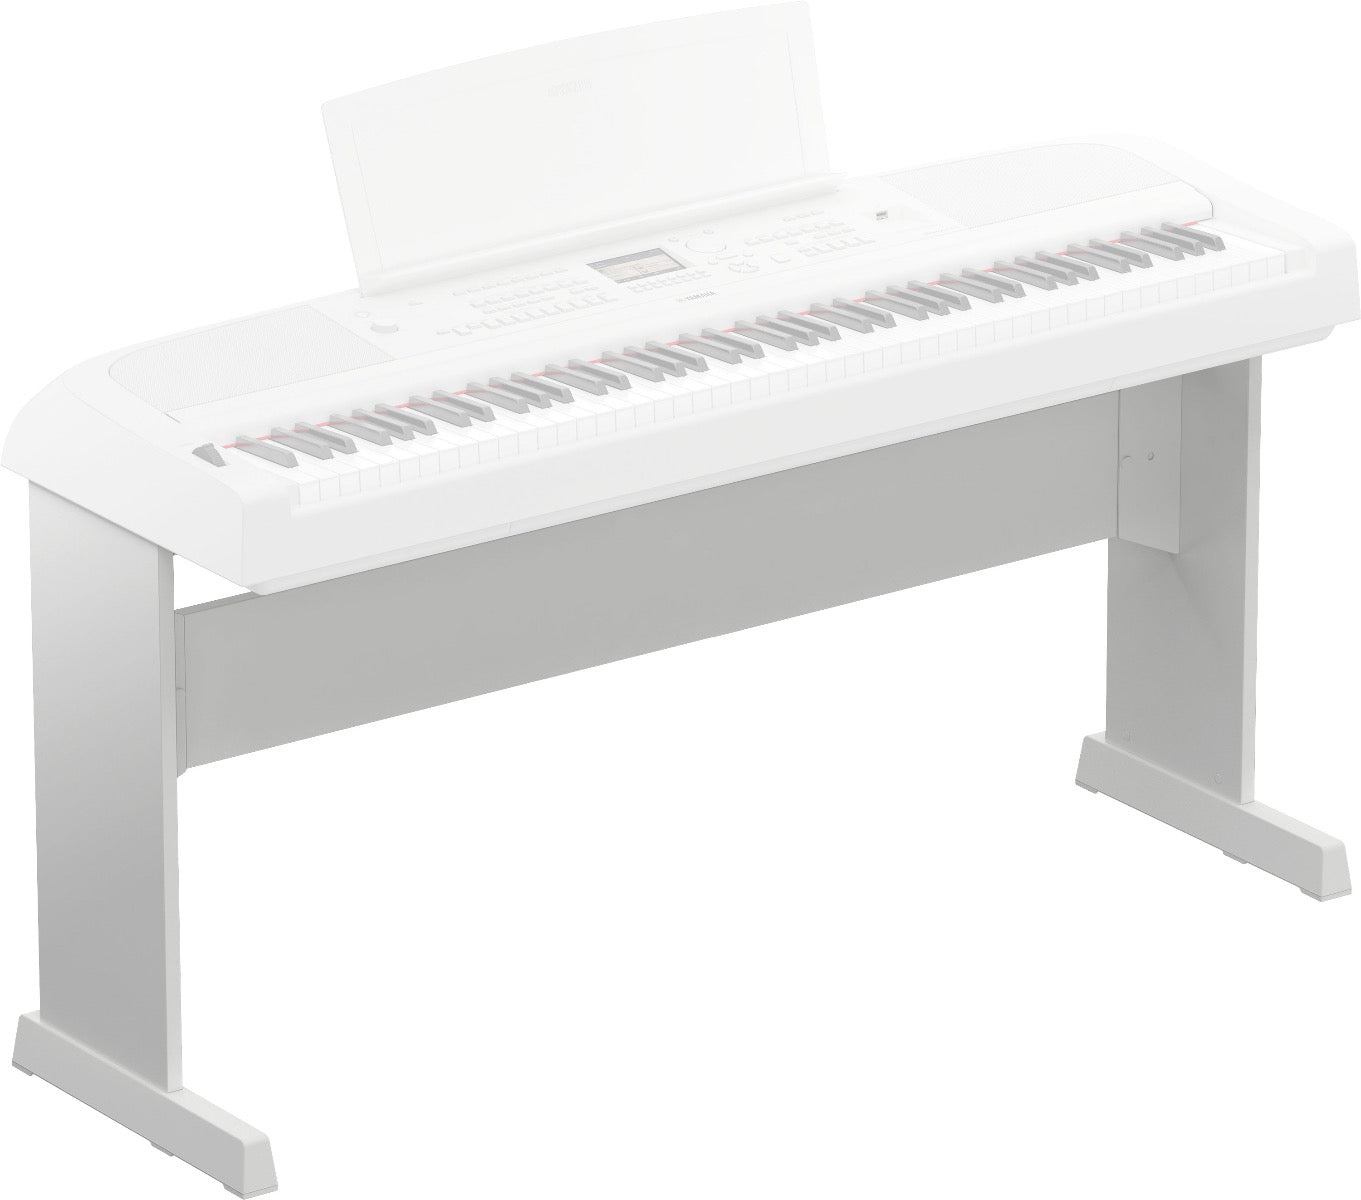 3/4 view of Yamaha L-300 Furniture-Style Piano Stand for DGX-670 - White with semi-transparent image of Yamaha DGX-670 Portable Grand Digital Piano - White (sold separately) for reference showing front, top and left side